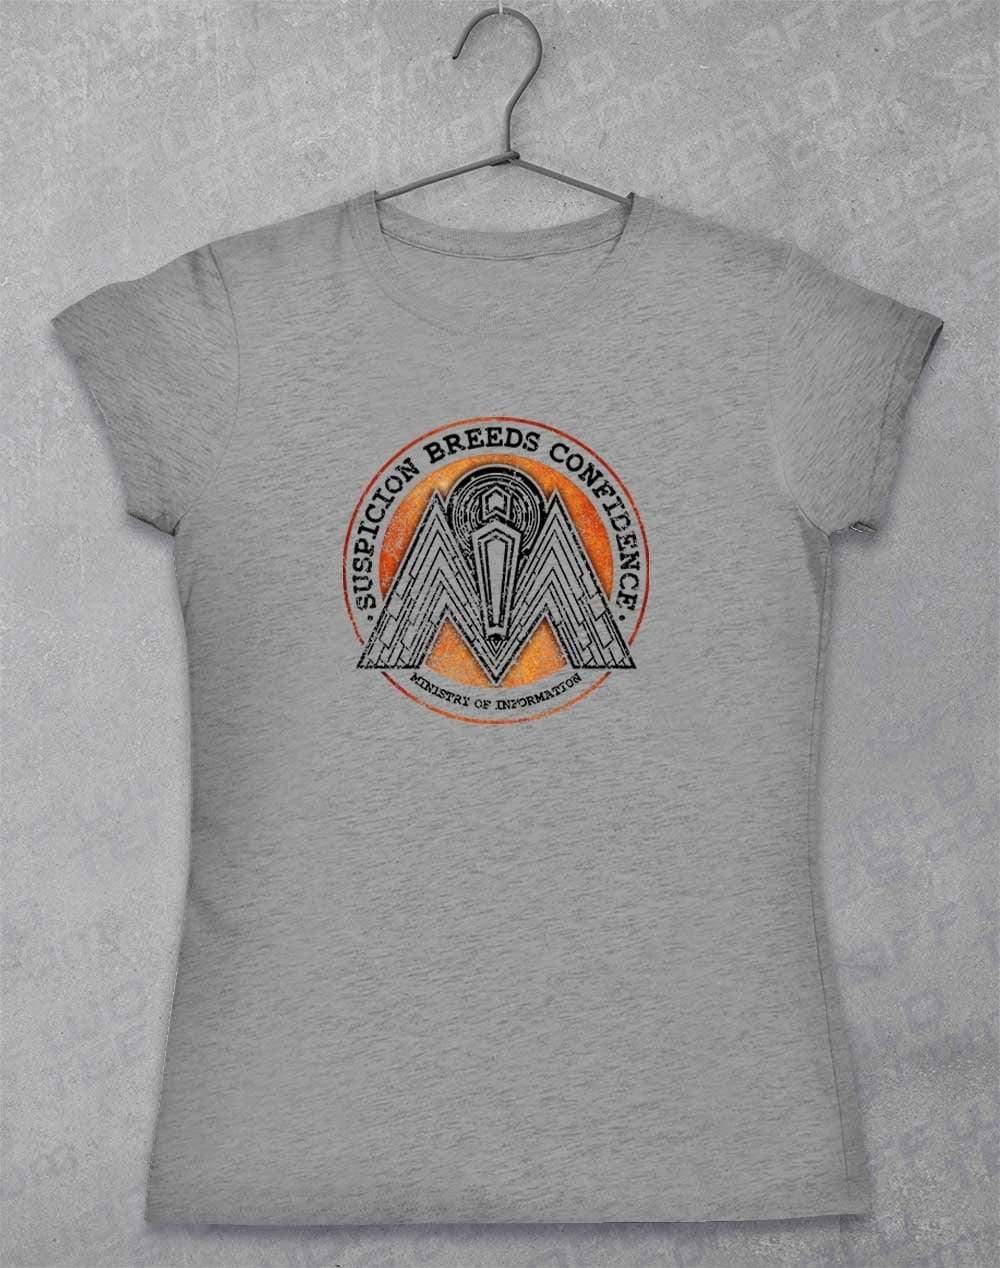 Ministry of Information Women's T-Shirt 8-10 / Sport Grey  - Off World Tees